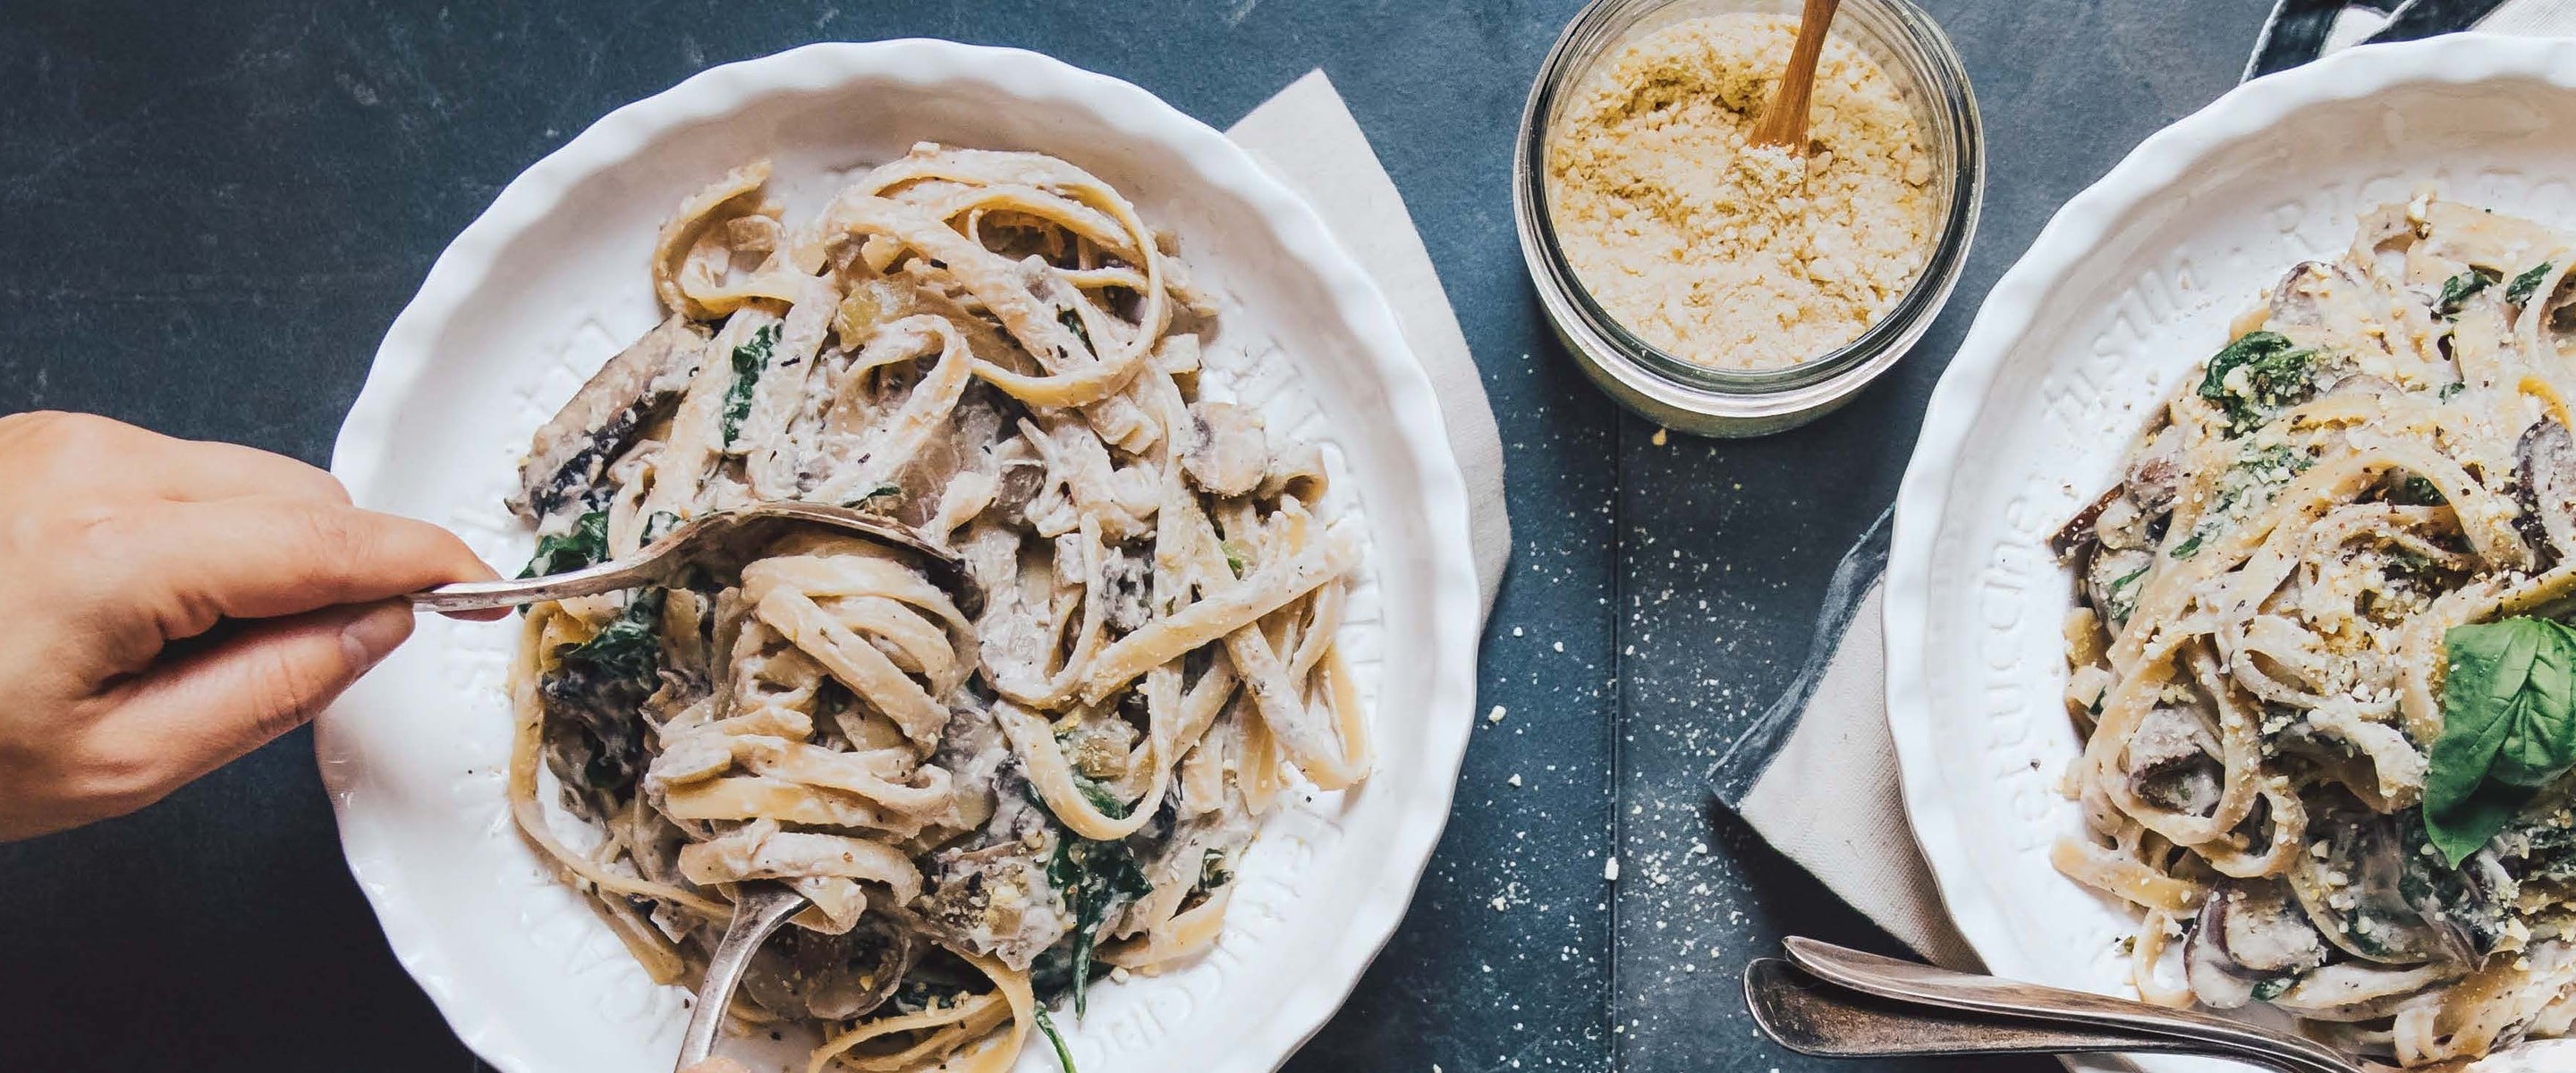 16 Delicious Ways to Use Nutritional Yeast